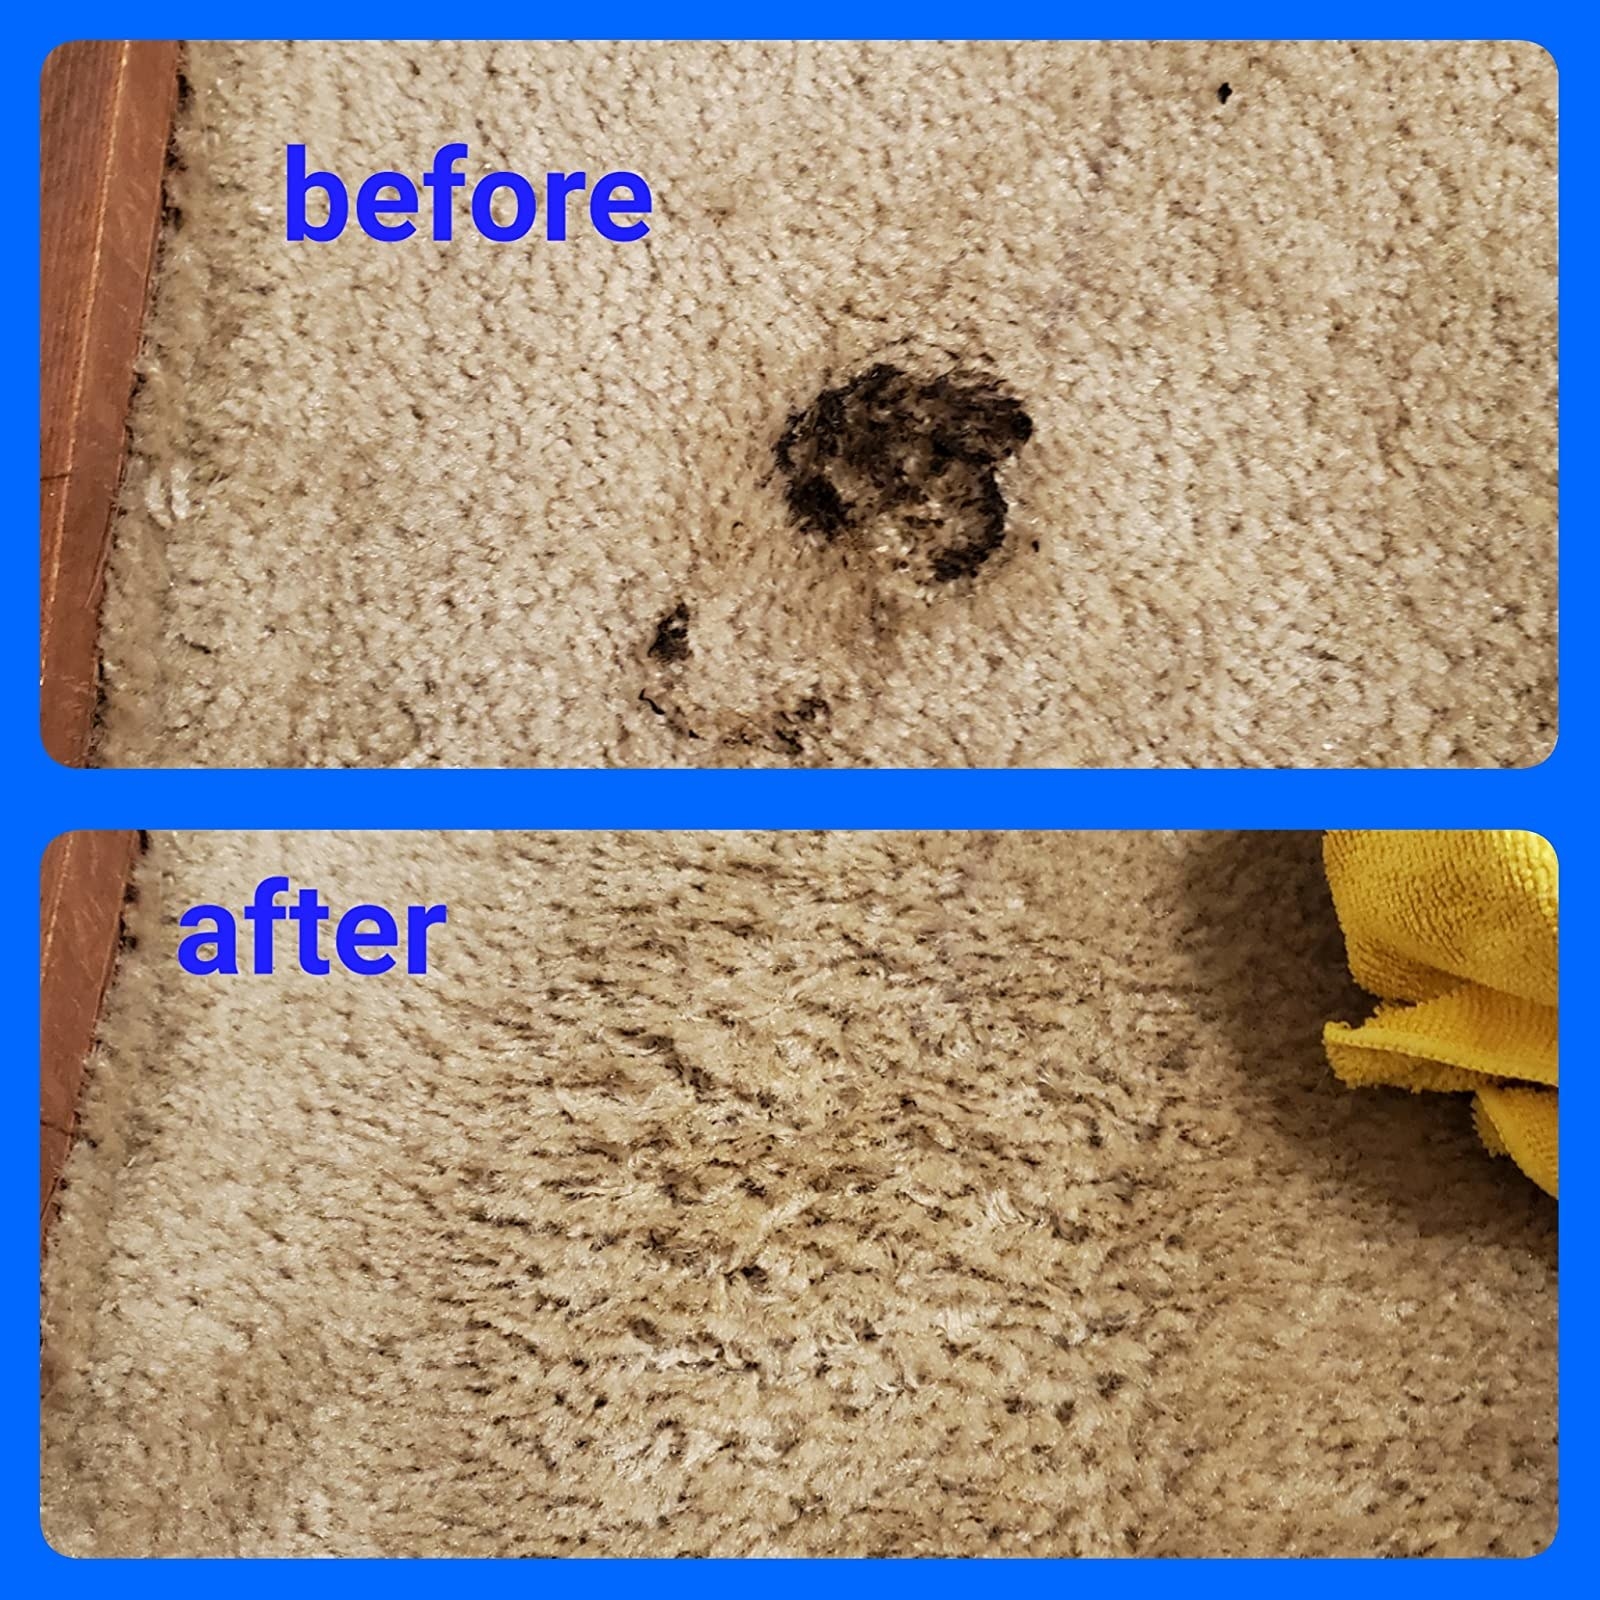 review of a before and after of someone that used the remover to clean up pet poop